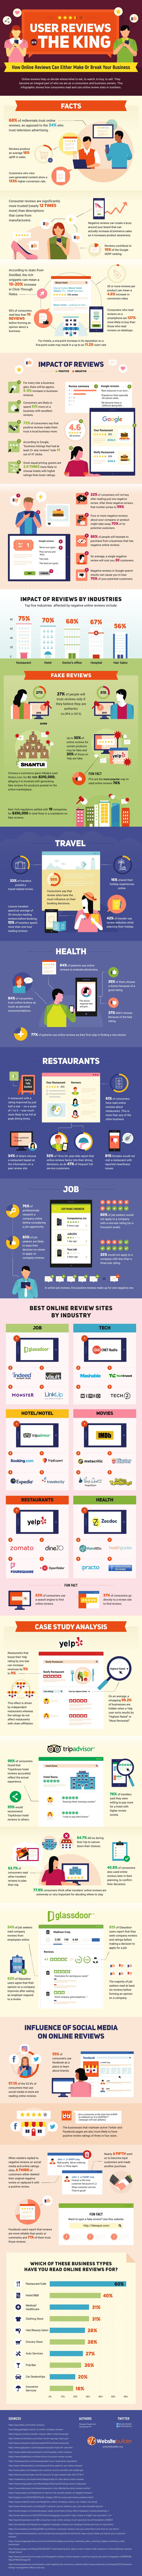 WebsiteBuilder.org looks at the role user-generated online reviews